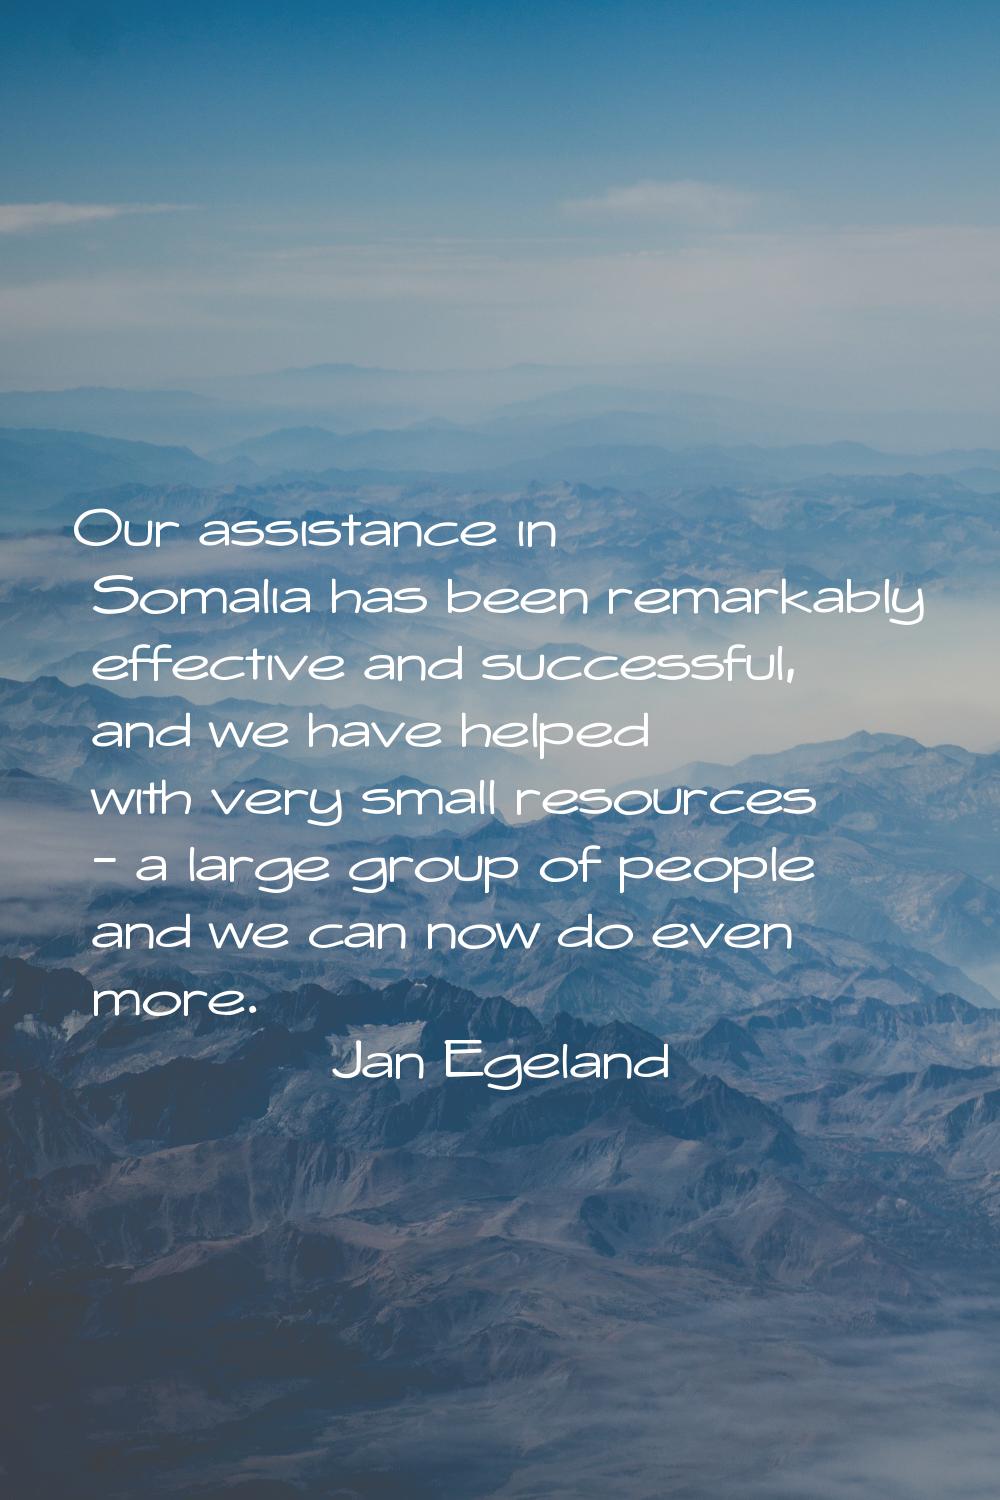 Our assistance in Somalia has been remarkably effective and successful, and we have helped with ver